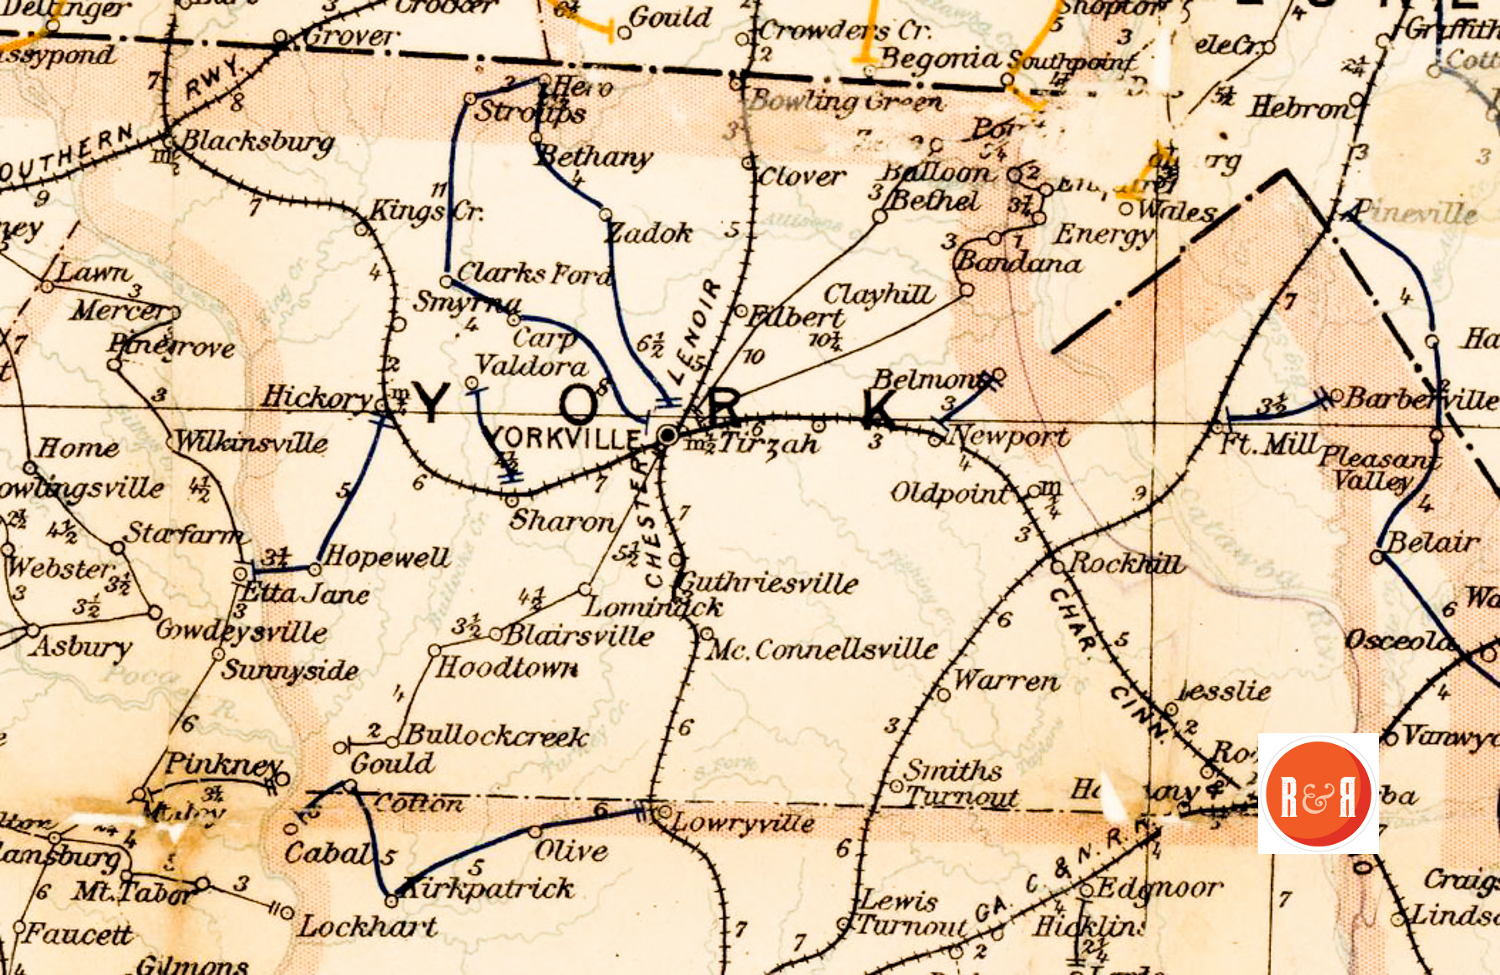 1850s Railroad Map showing Smith's